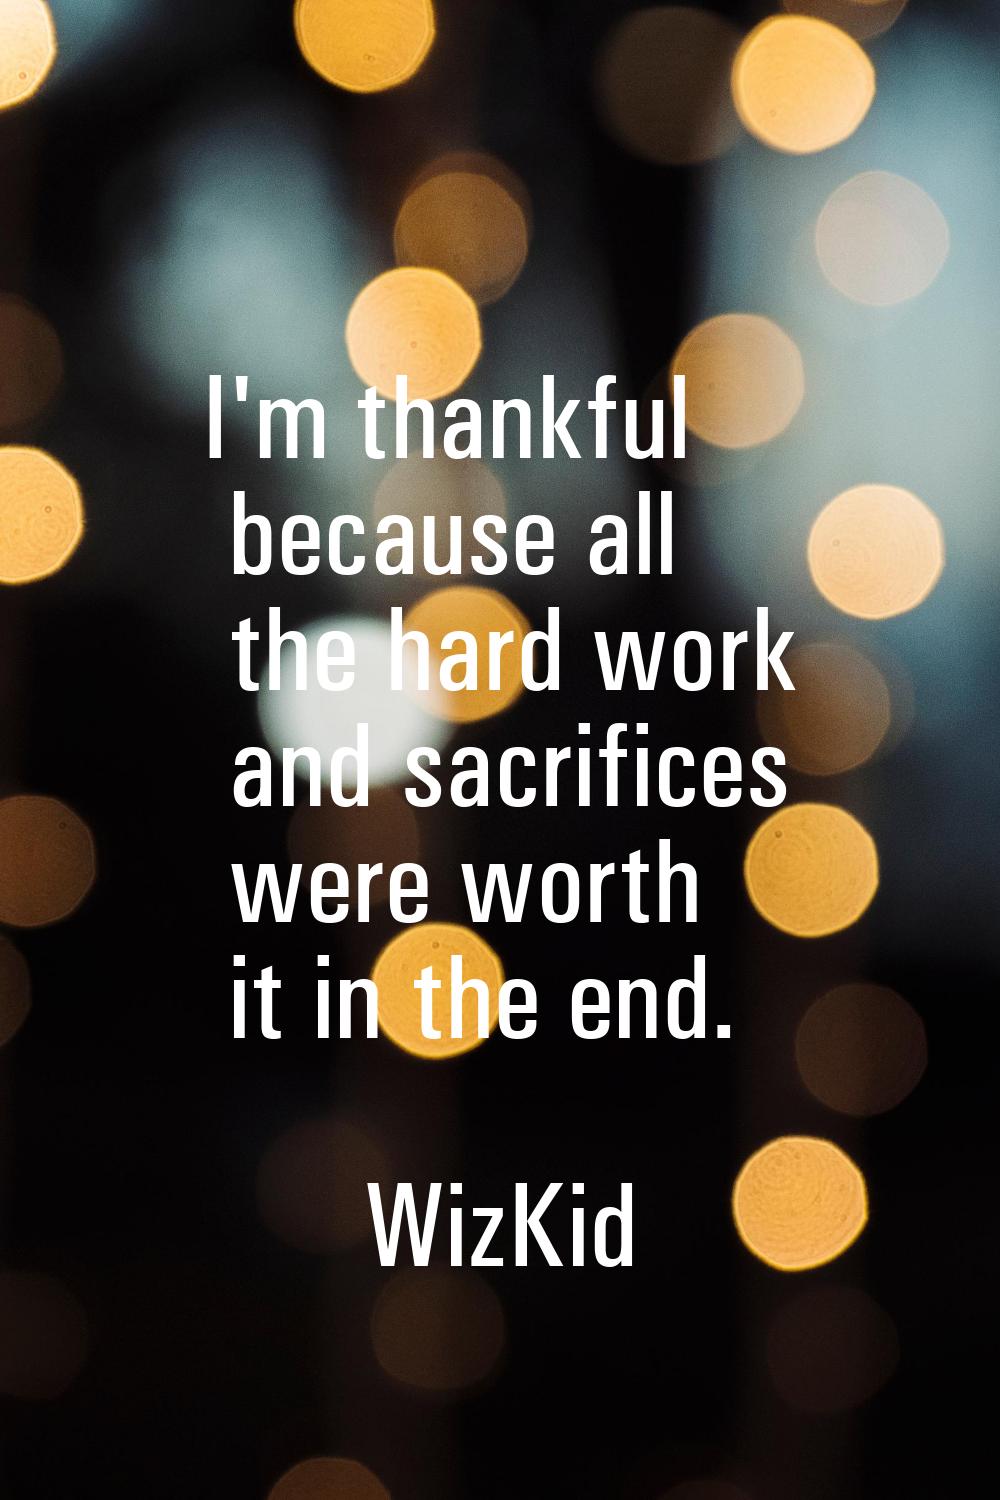 I'm thankful because all the hard work and sacrifices were worth it in the end.